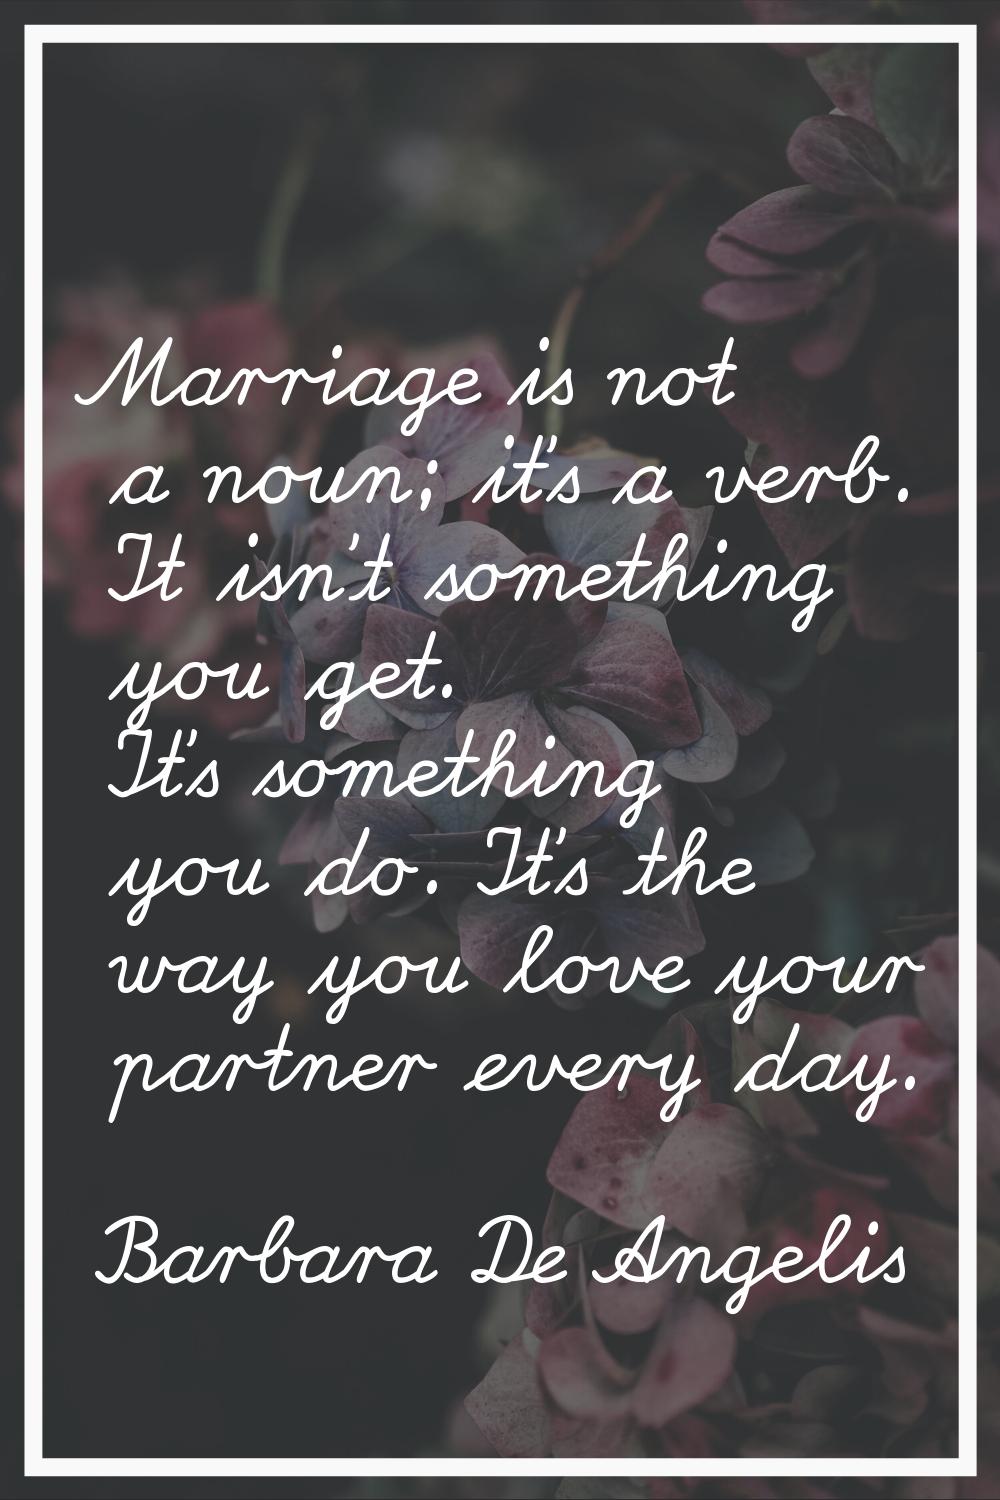 Marriage is not a noun; it's a verb. It isn't something you get. It's something you do. It's the wa